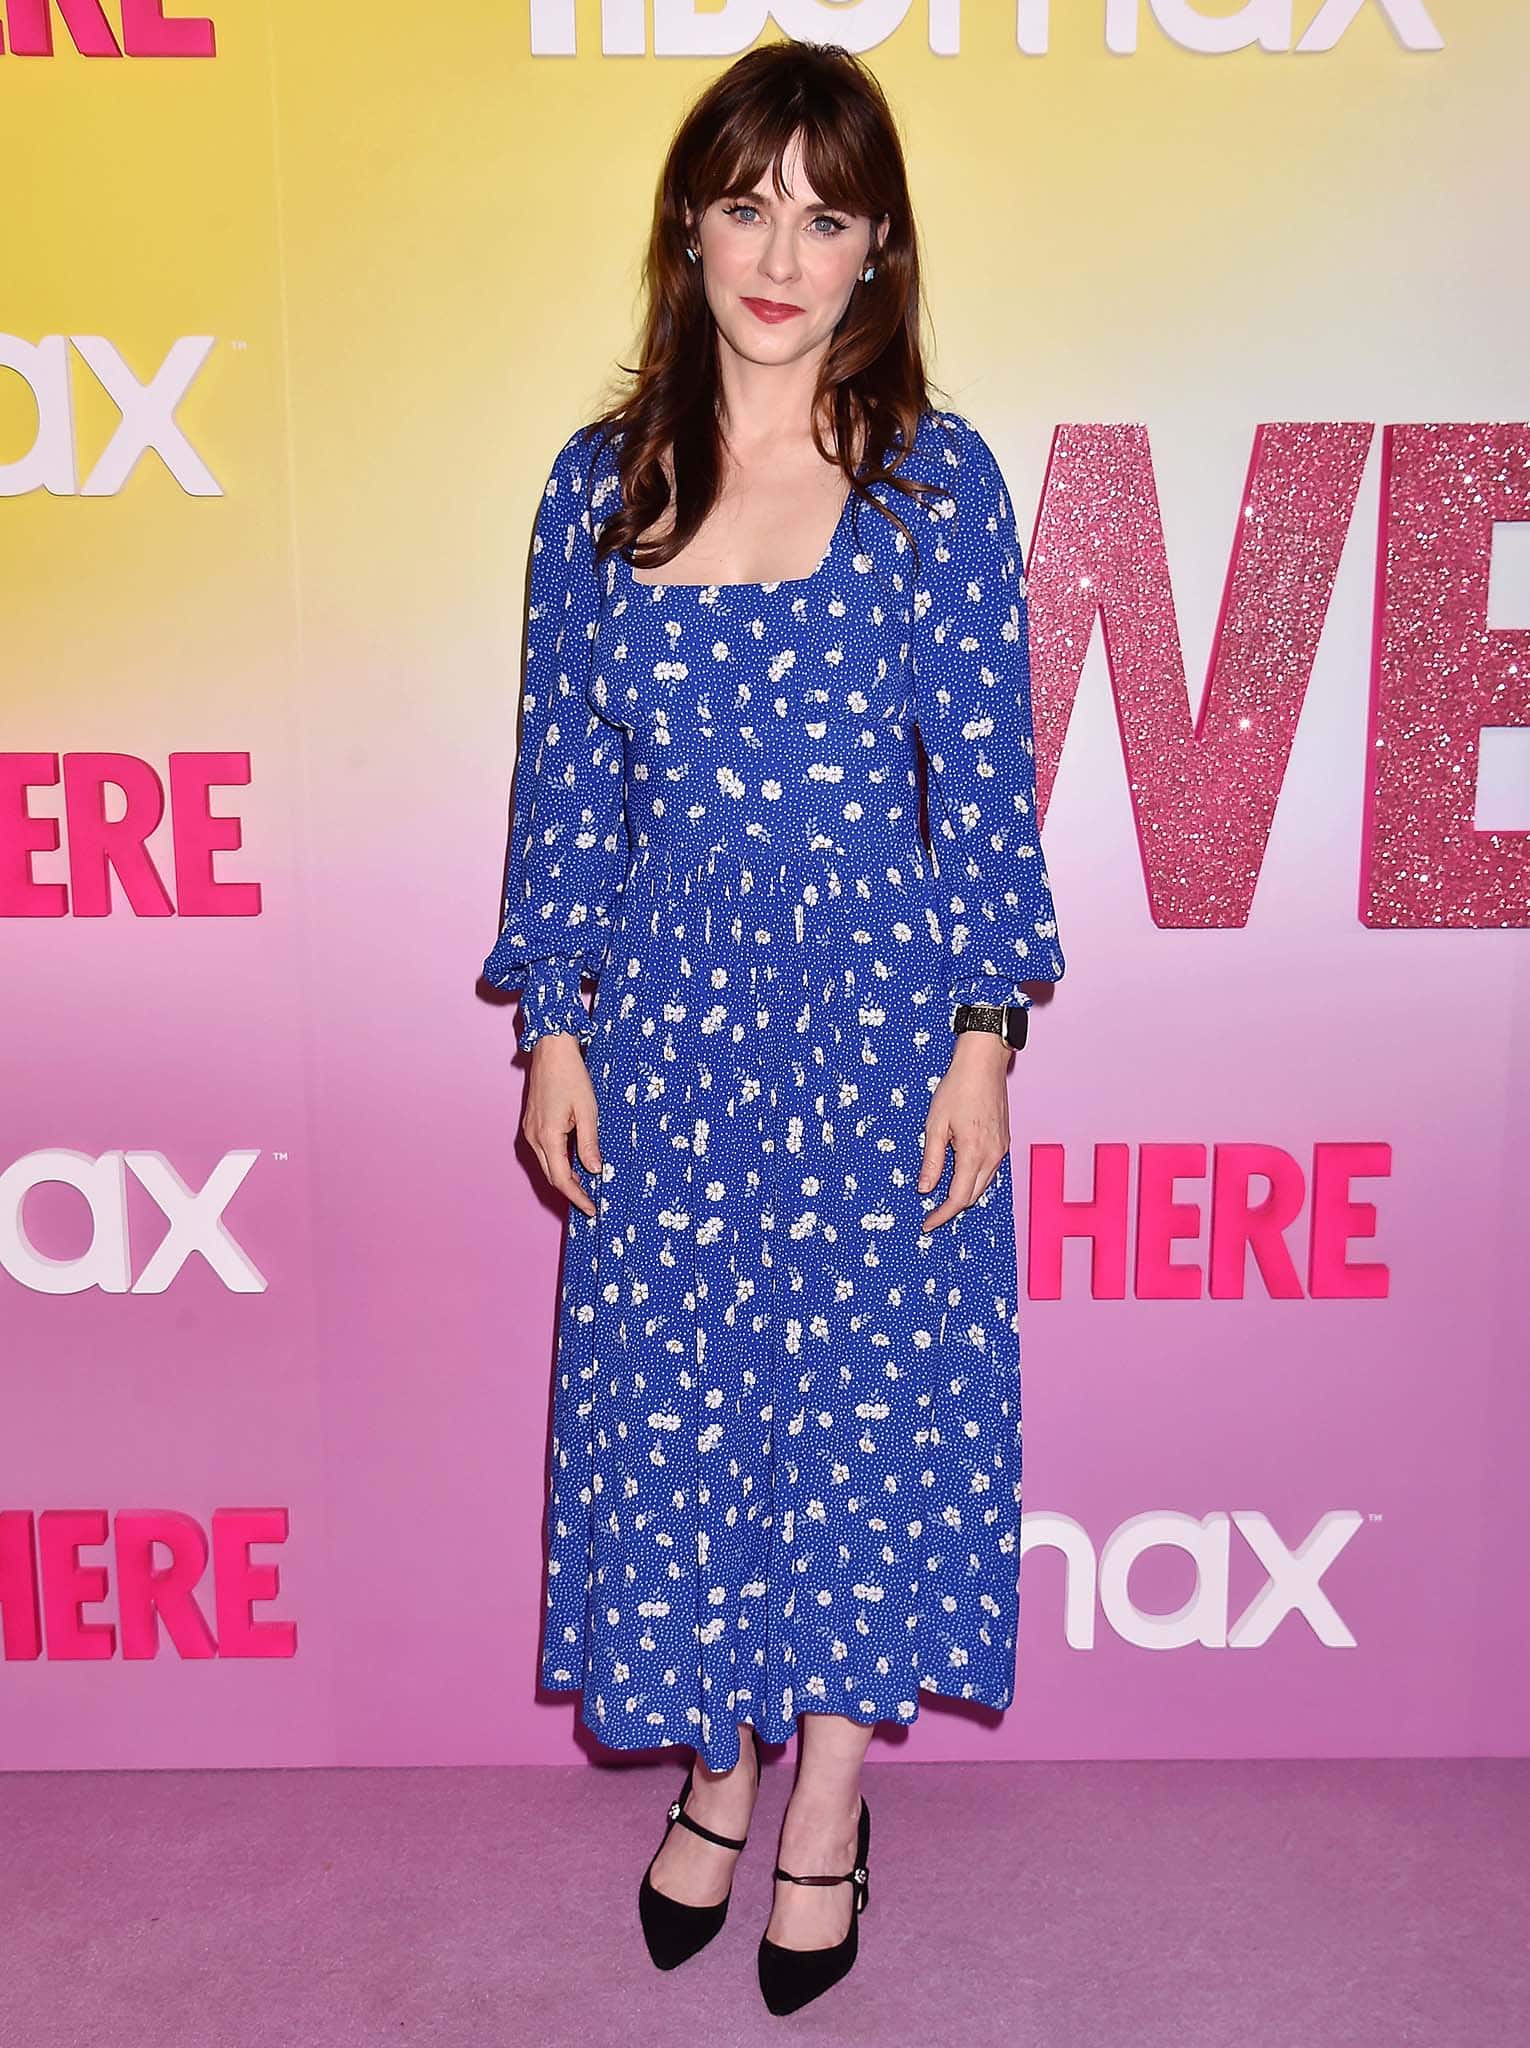 Zooey Deschanel opts for a feminine blue floral dress with a low-cut square neckline